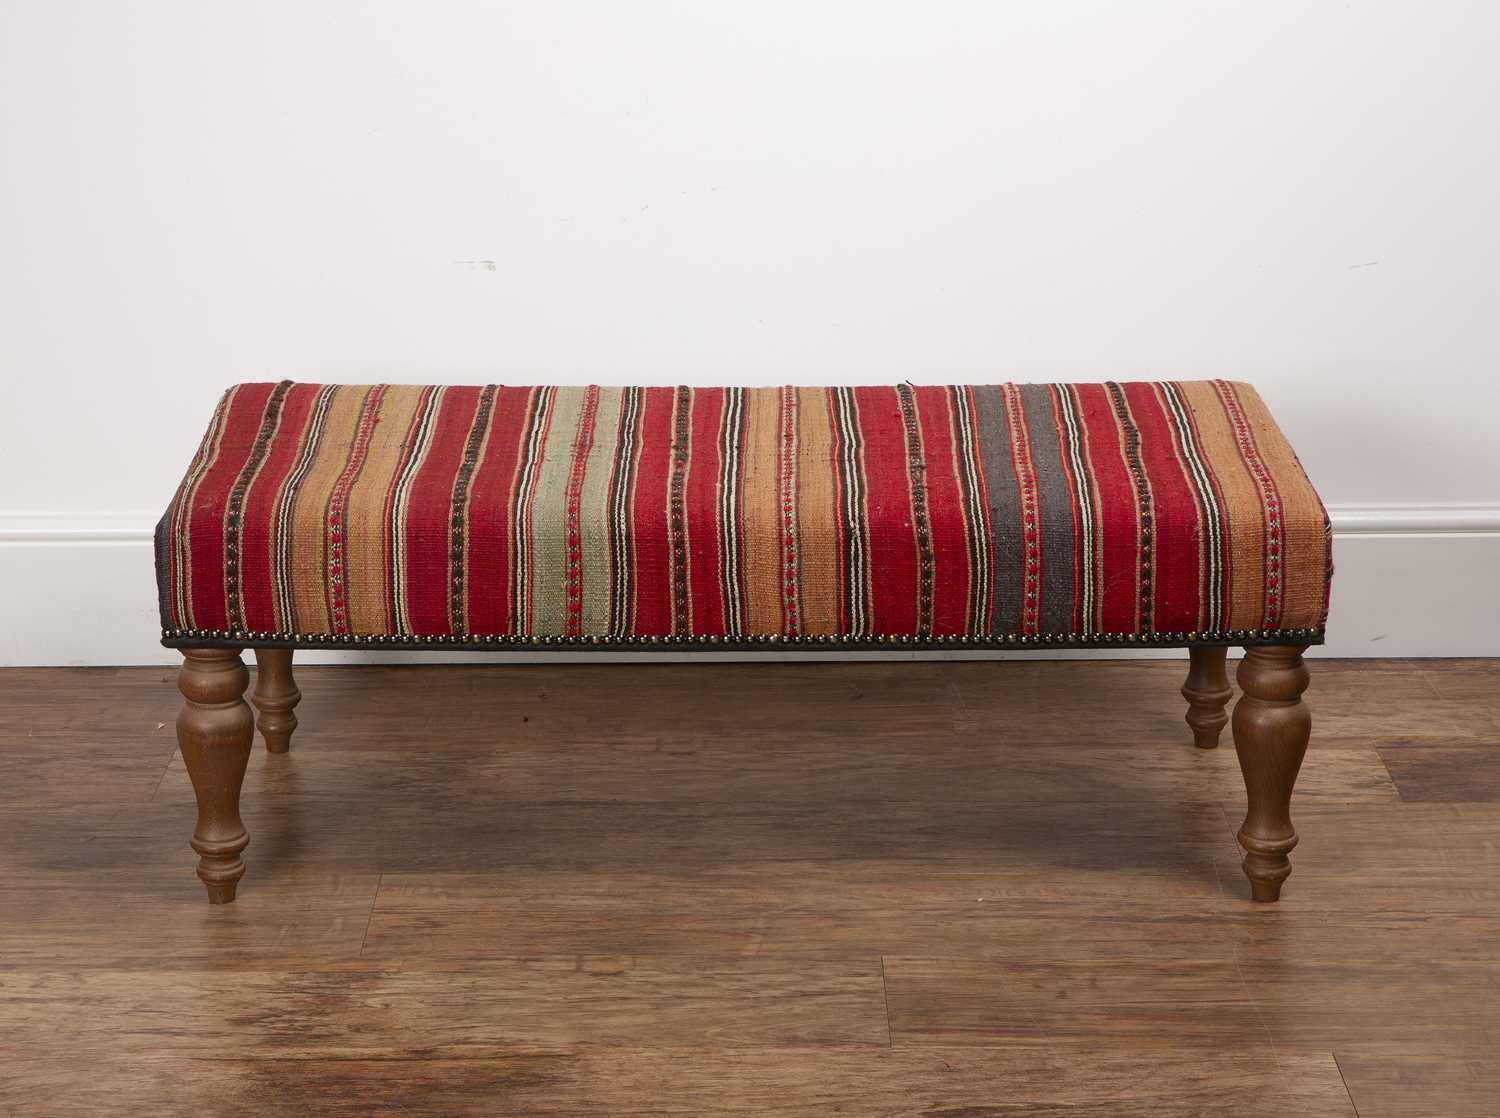 Contemporary footstool with a Kelim type cover, 102cm long x 46cm deep x 38cm high Provenance: The - Image 4 of 5